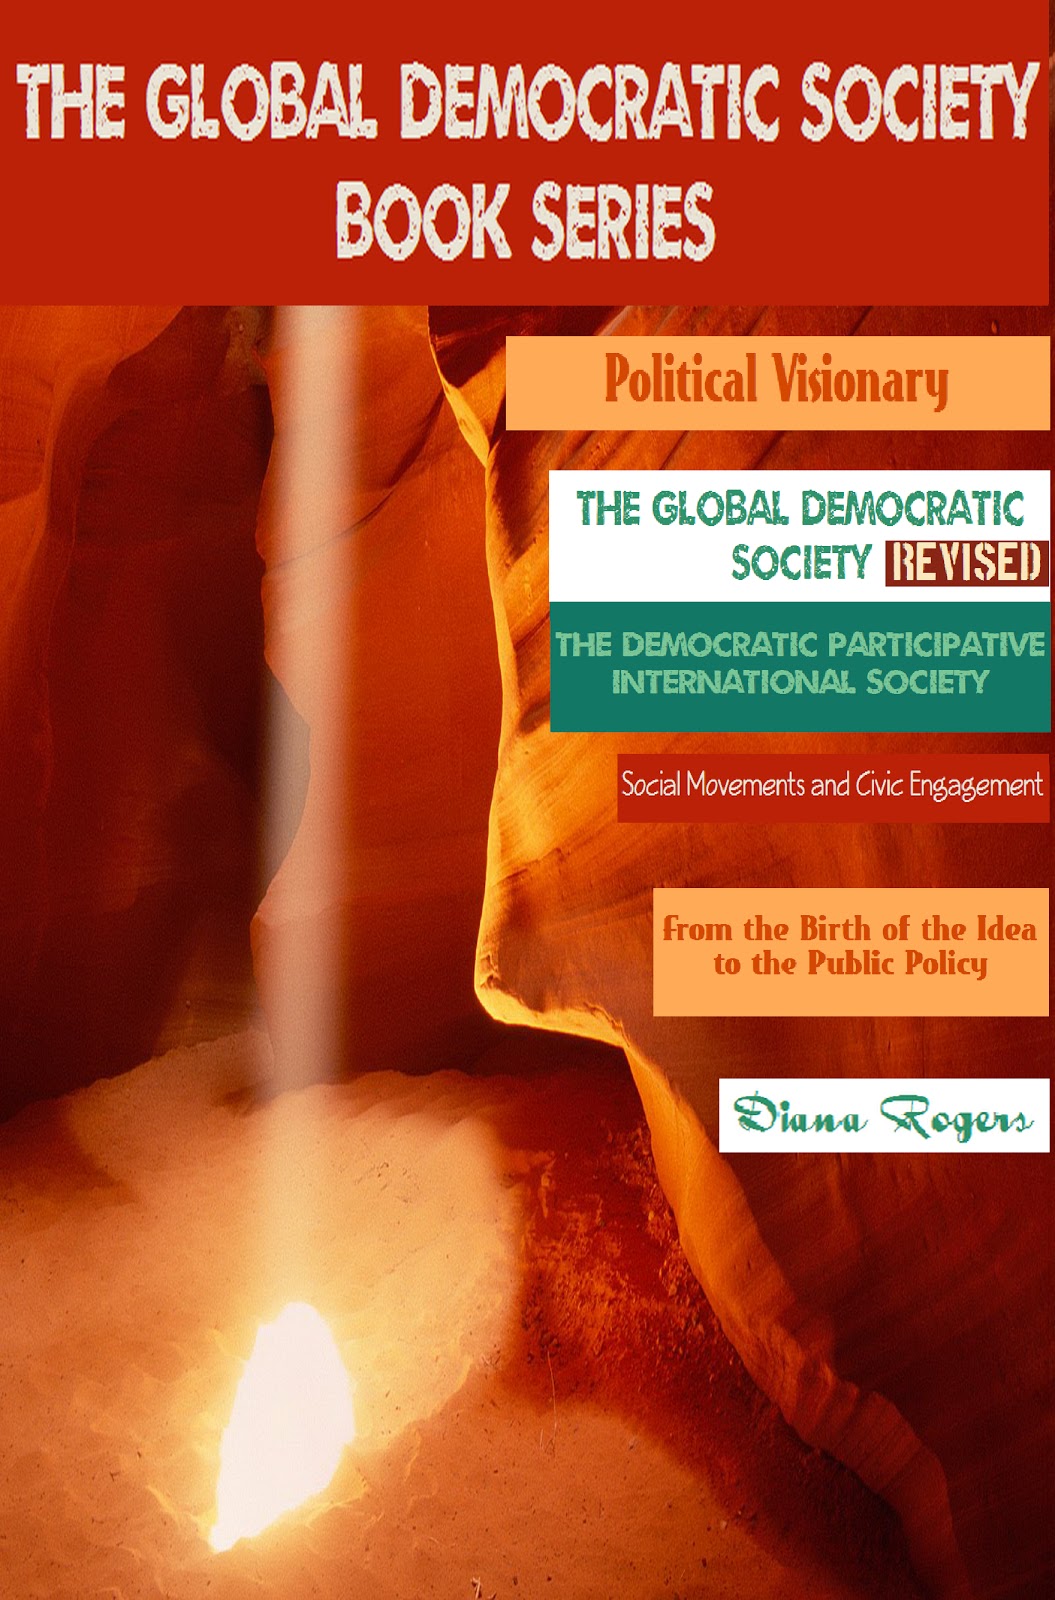 The Global Democratic Society: The Participative Democratic International Society [Kindle Edition]